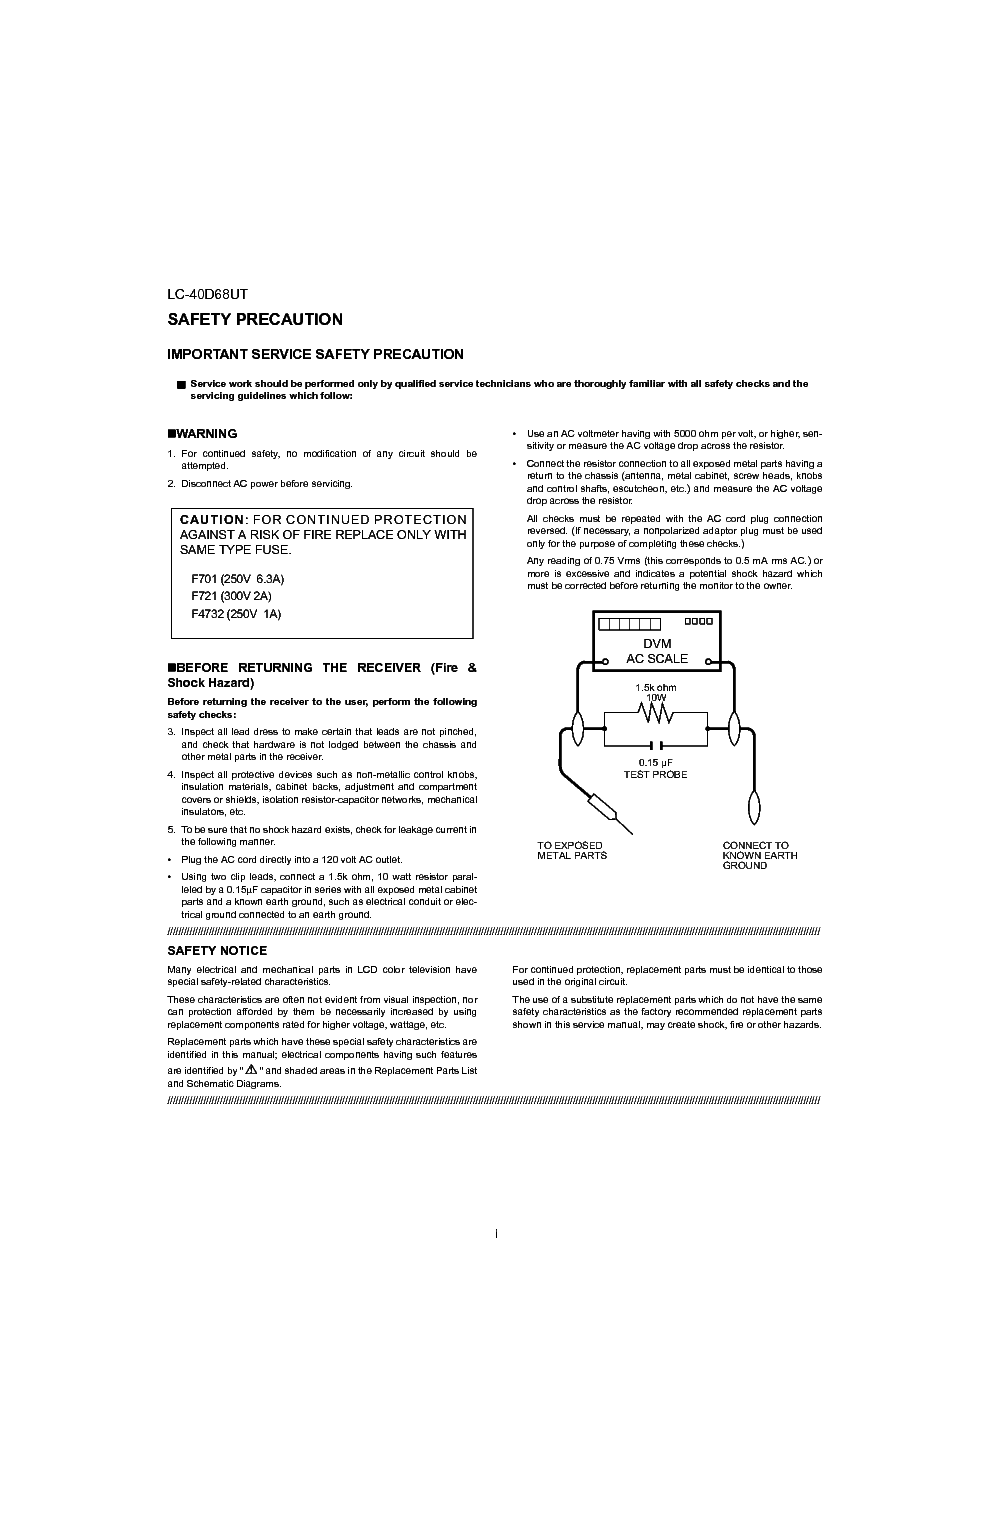 SHARP LC-40D68UT service manual (2nd page)